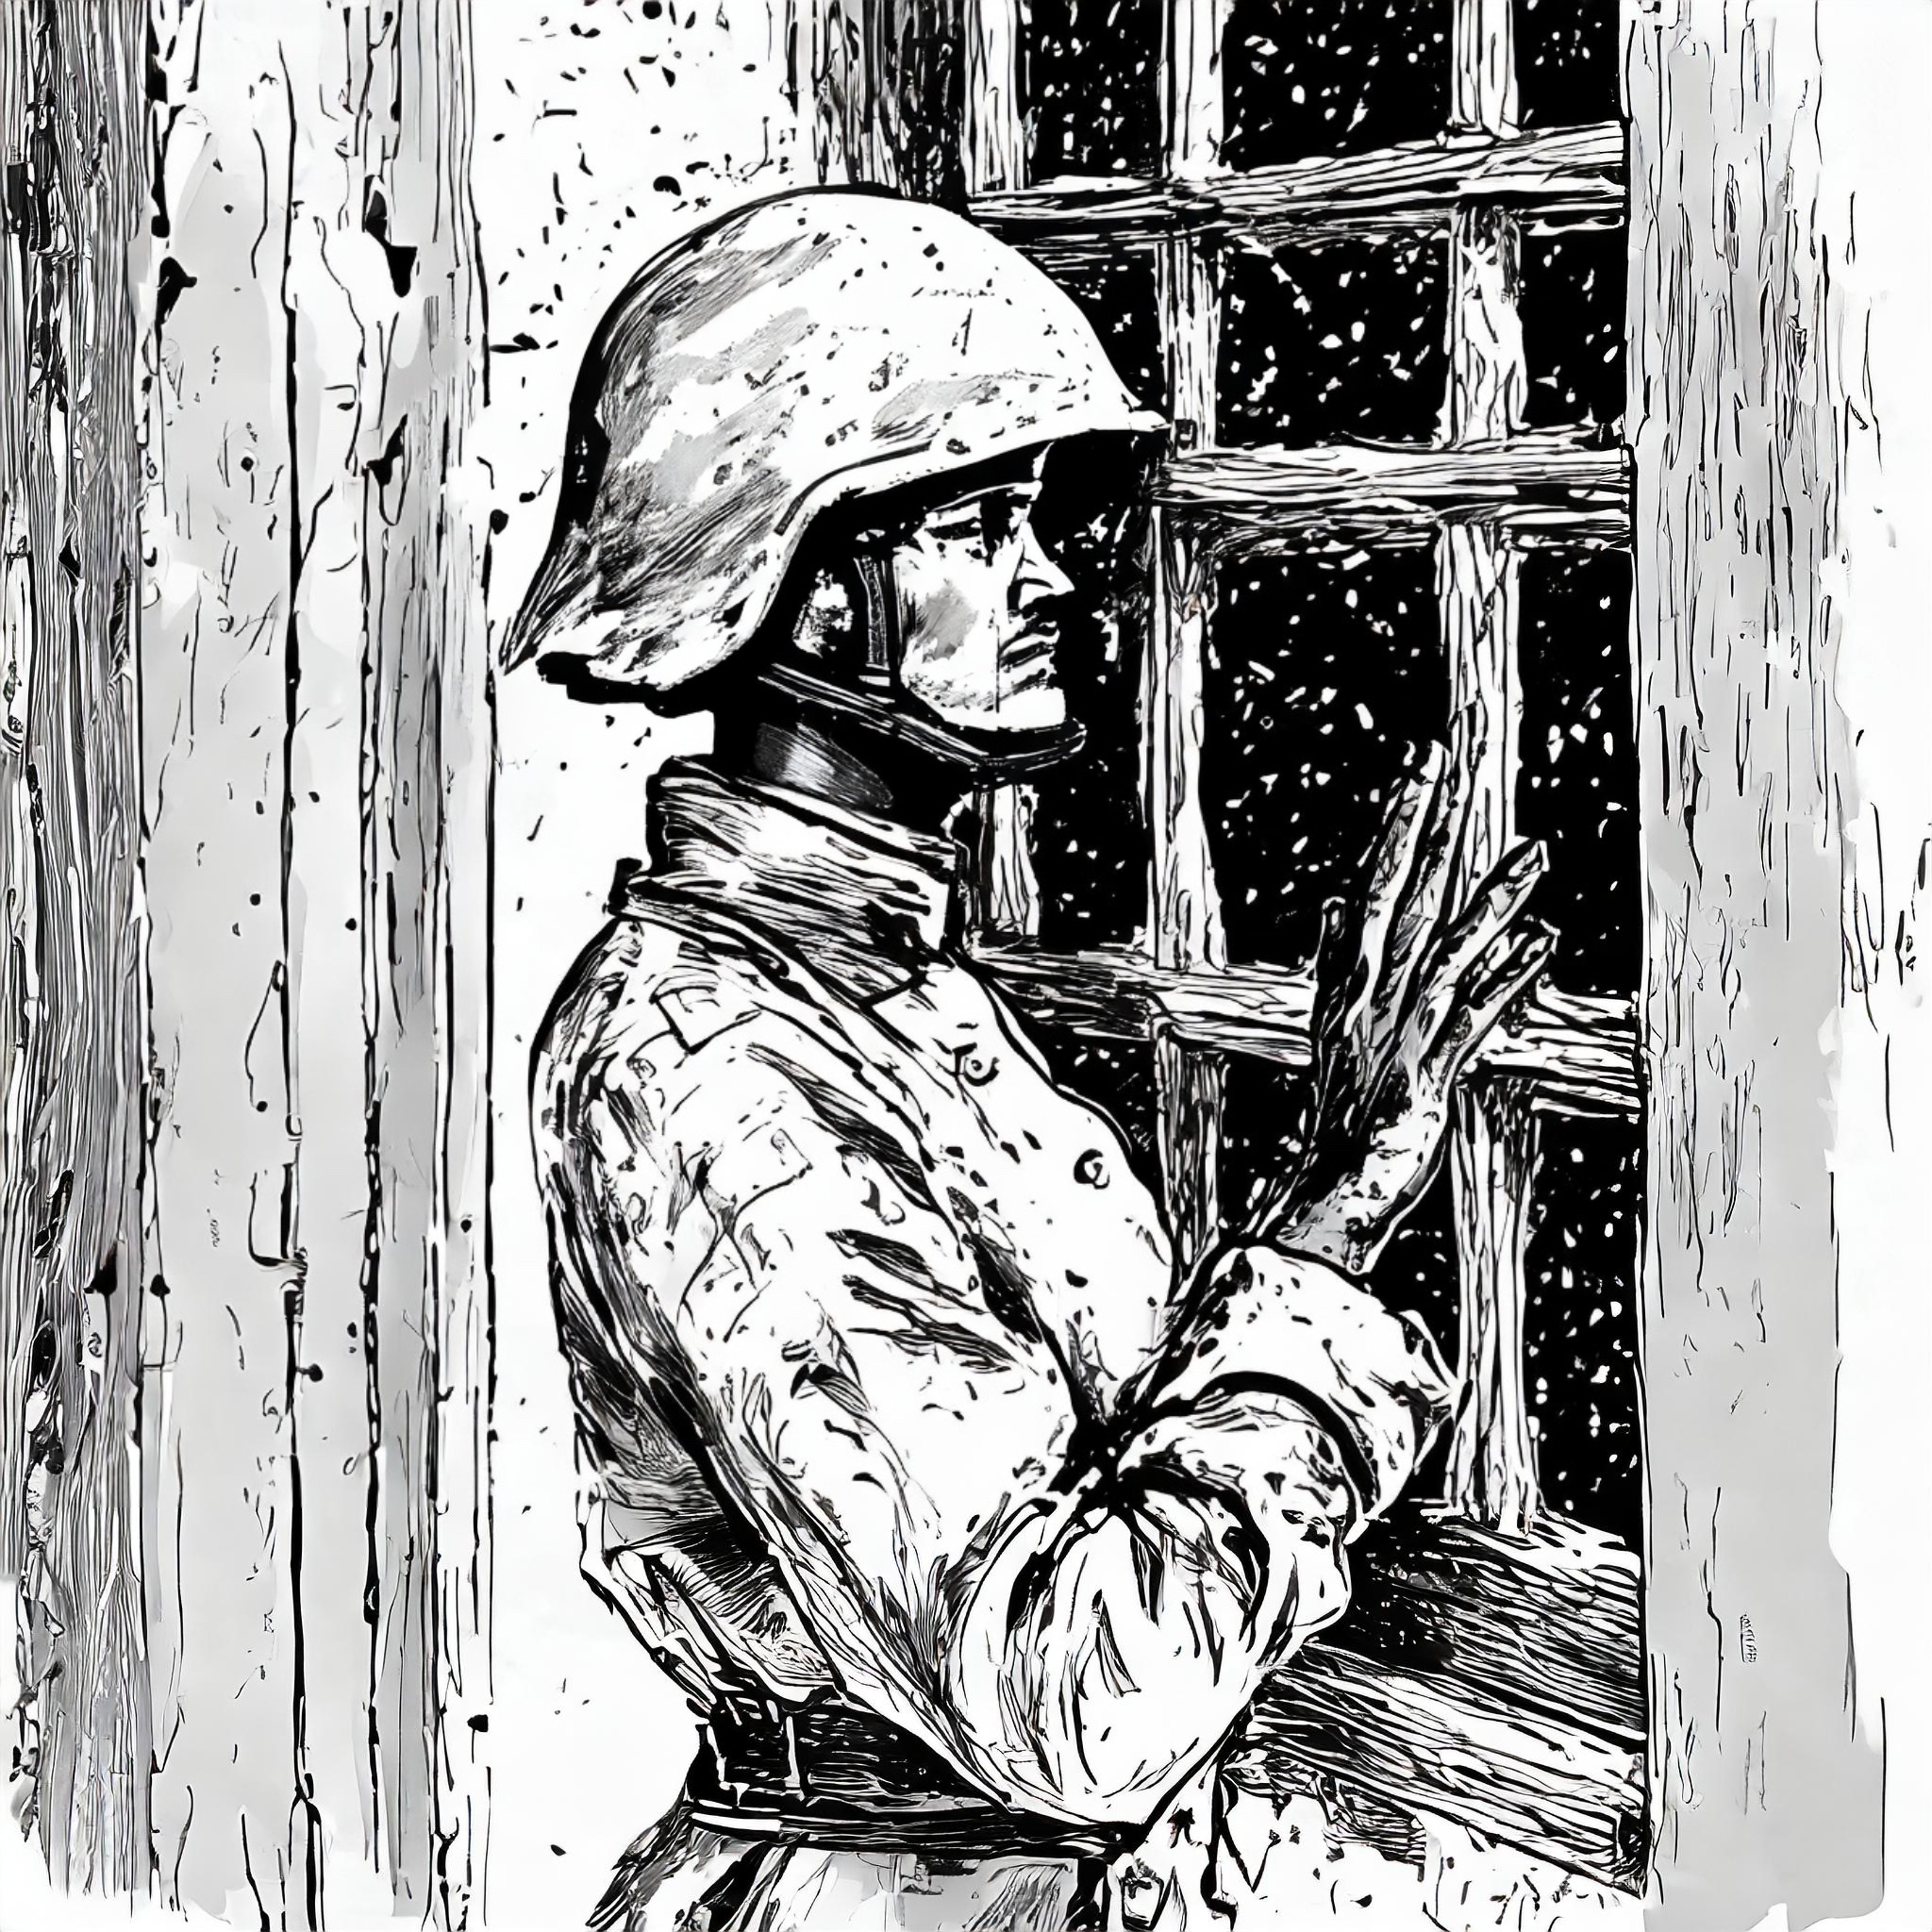 At 1945, a soldier knocks on the boarded-up window, he stood in the darkness and asked to be let in, At 1945, a soldier knocks on the boarded-up window, he stood in the darkness